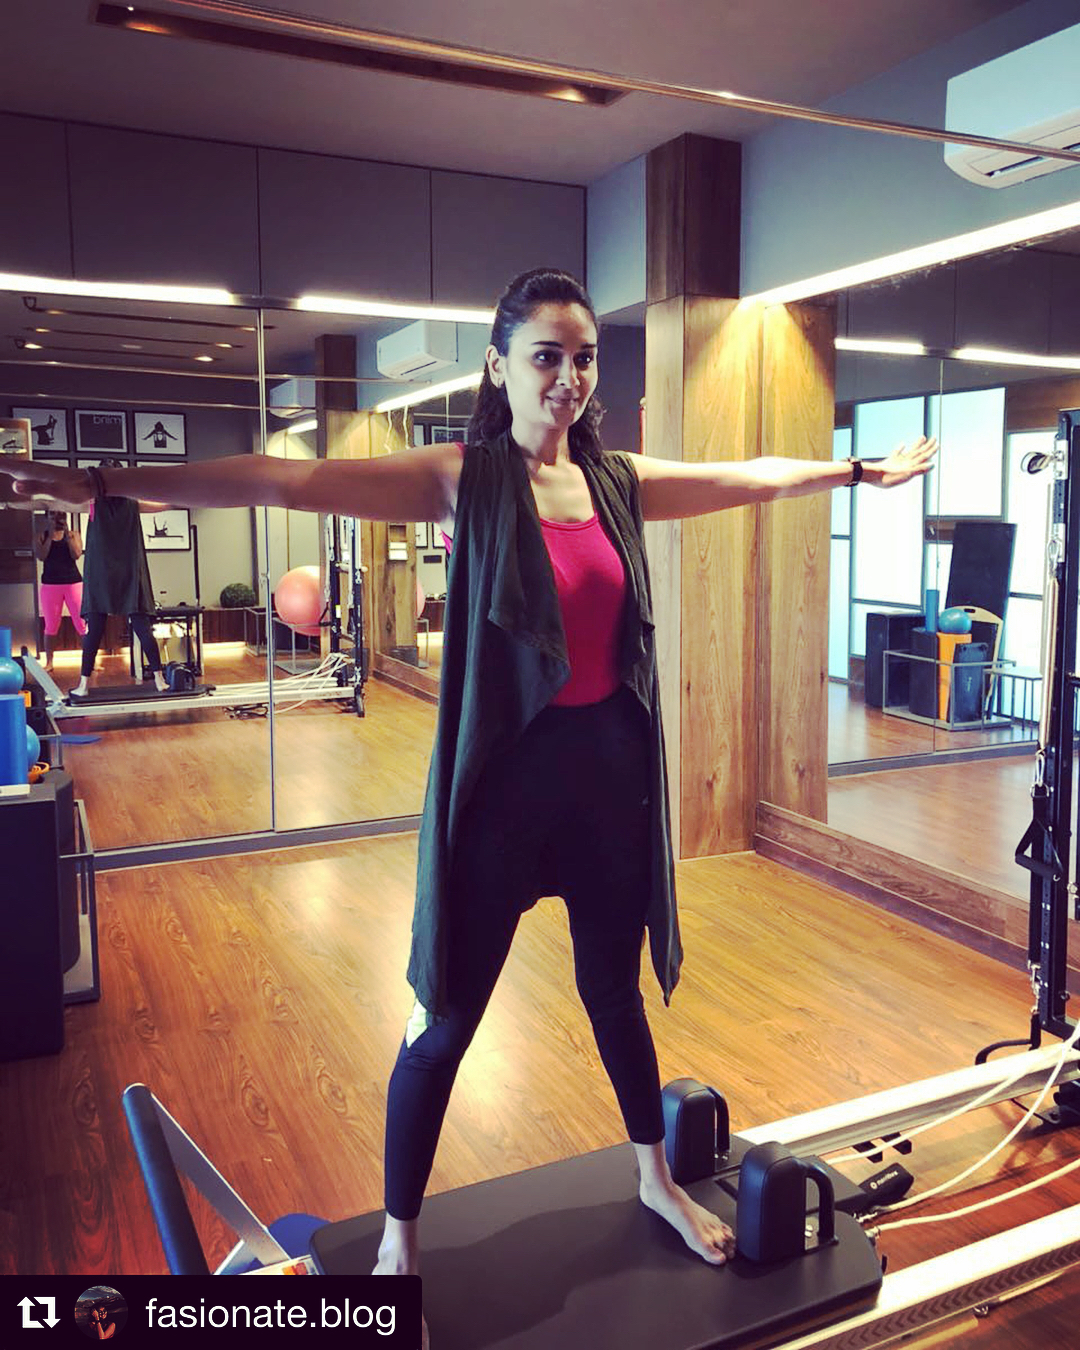 #ClientDiaries: Check out what @fasionate.blog has to say about her experience at @thepilatesstudioahmedabad 🤩👇🏻
・・・
Rise and shine ahmedabad it’s PILATES time !! Pilates is one of the fastest growing forms of exercise in the world.
@thepilatesstudioahmedabad is a unique studio that offering complete Pilates training. At the studio workout will be on the equipment such as reformer, stability chair and Cadillac as well as on the mat ensuring we get maximum benefit out of the Pilates session. 
They even say At the studio we will be empowered to :
Increase stamina
Discover your inner strength 
Improve core strength & health 
Transform our mind and body 
To know more about Pilates and for trials please visit their nearest studio. @thepilatesstudioahmedabad 
#Pilates #ThePilatesStudio #strength #flexibility #mind #body #soul #workout #FitnessEnthusiast #Fitness #workout #fit #FitnessStudio #Fitspo  #Workout #WorkoutMotivation #fitness 
#pilatesgirl #pilatesbody #thepilatesstudioahemdabad #gettingbettereachday #fitnessforever #celebritytrainer #gettingbettereachday #fitnessforever #workhard #workhardplayhard